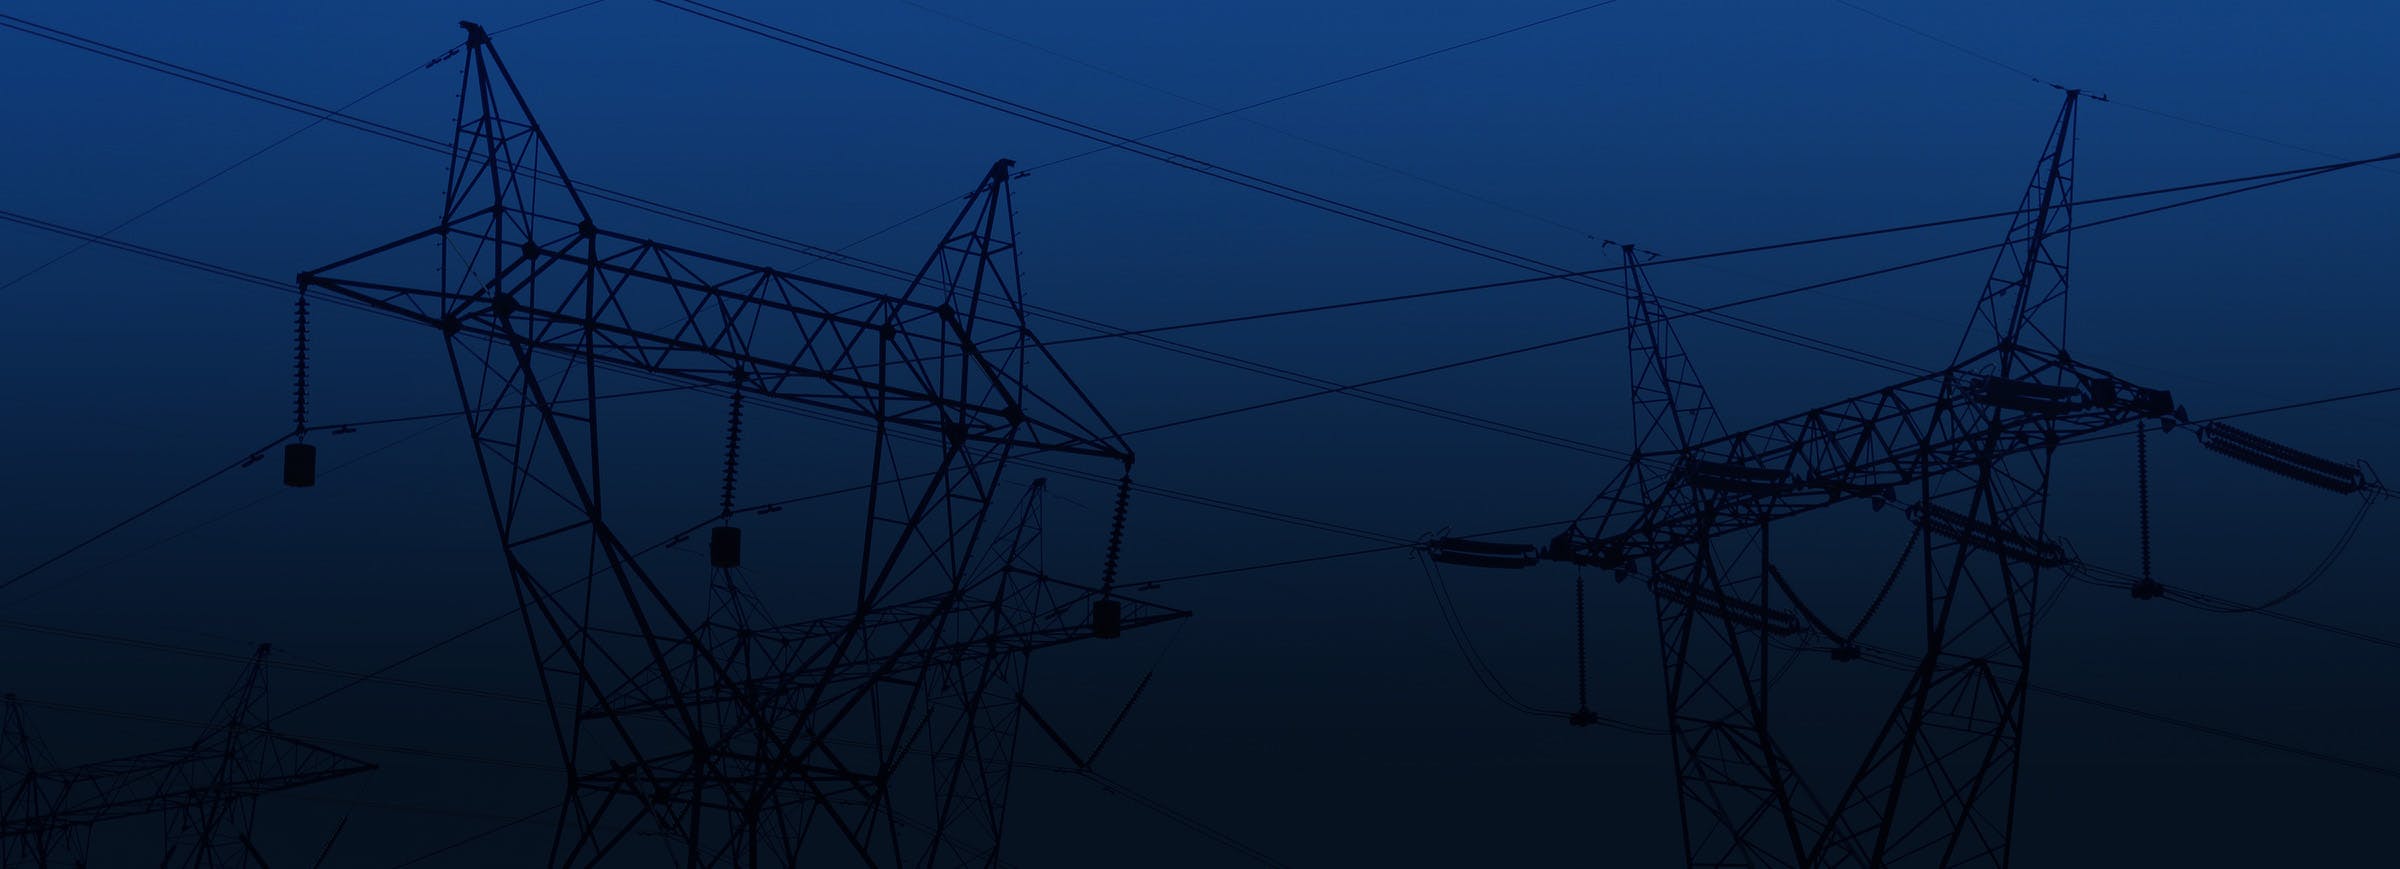 The Japanese electricity sector in crisis: How data can help making sense of the current situation